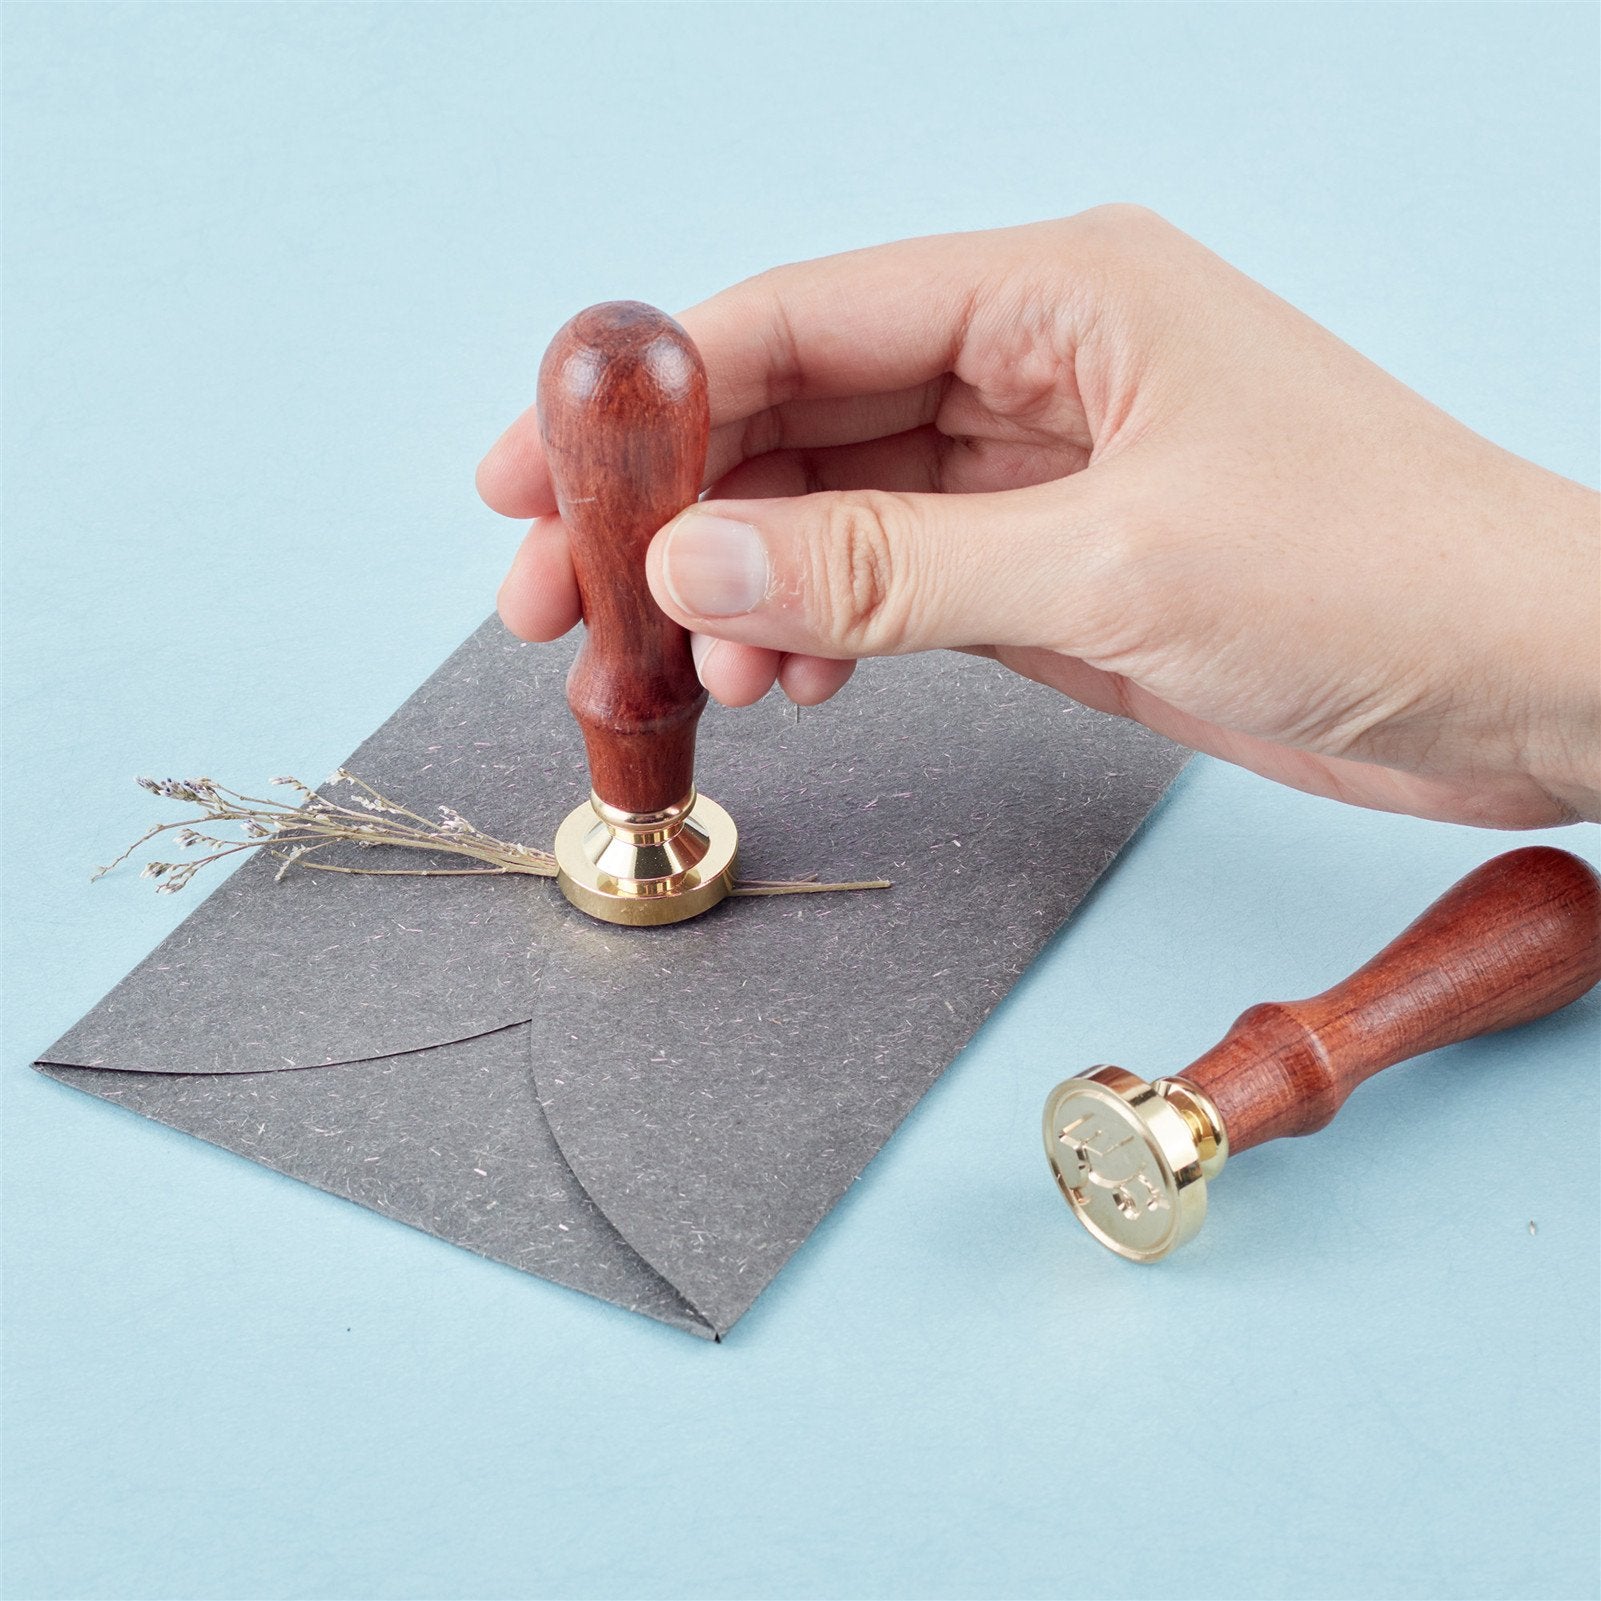 Knot-1 Wood Handle Wax Seal Stamp